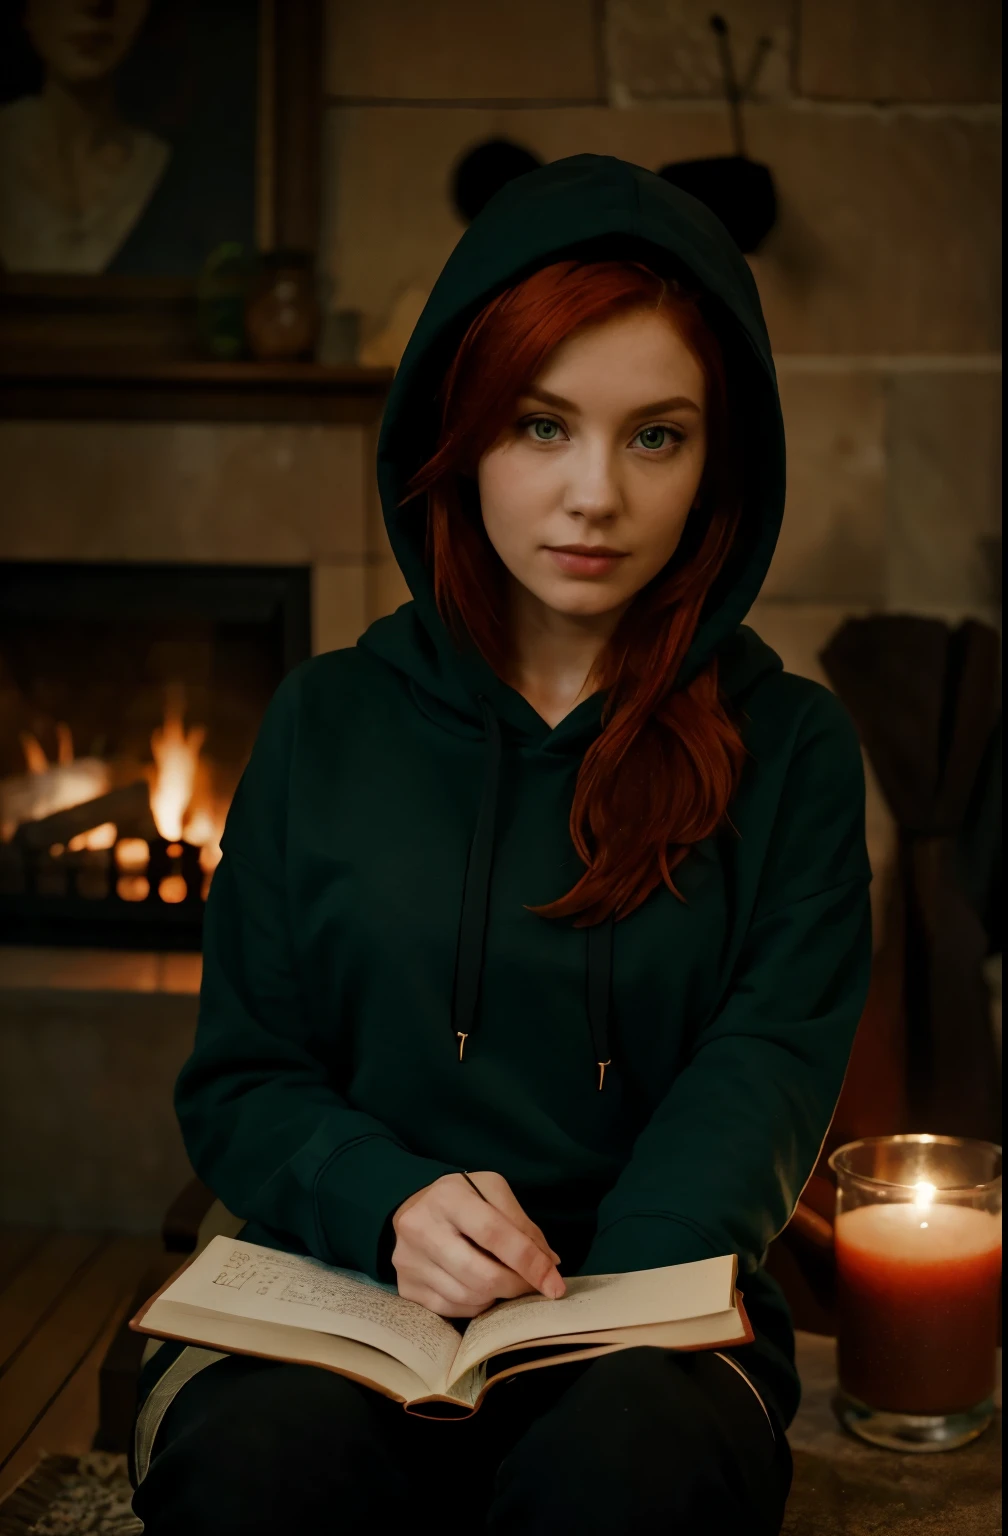 There is a skinny woman with red hair reading book, green eyes, black book, hoodie, hood, fireplace, dark light. 8k raw photo